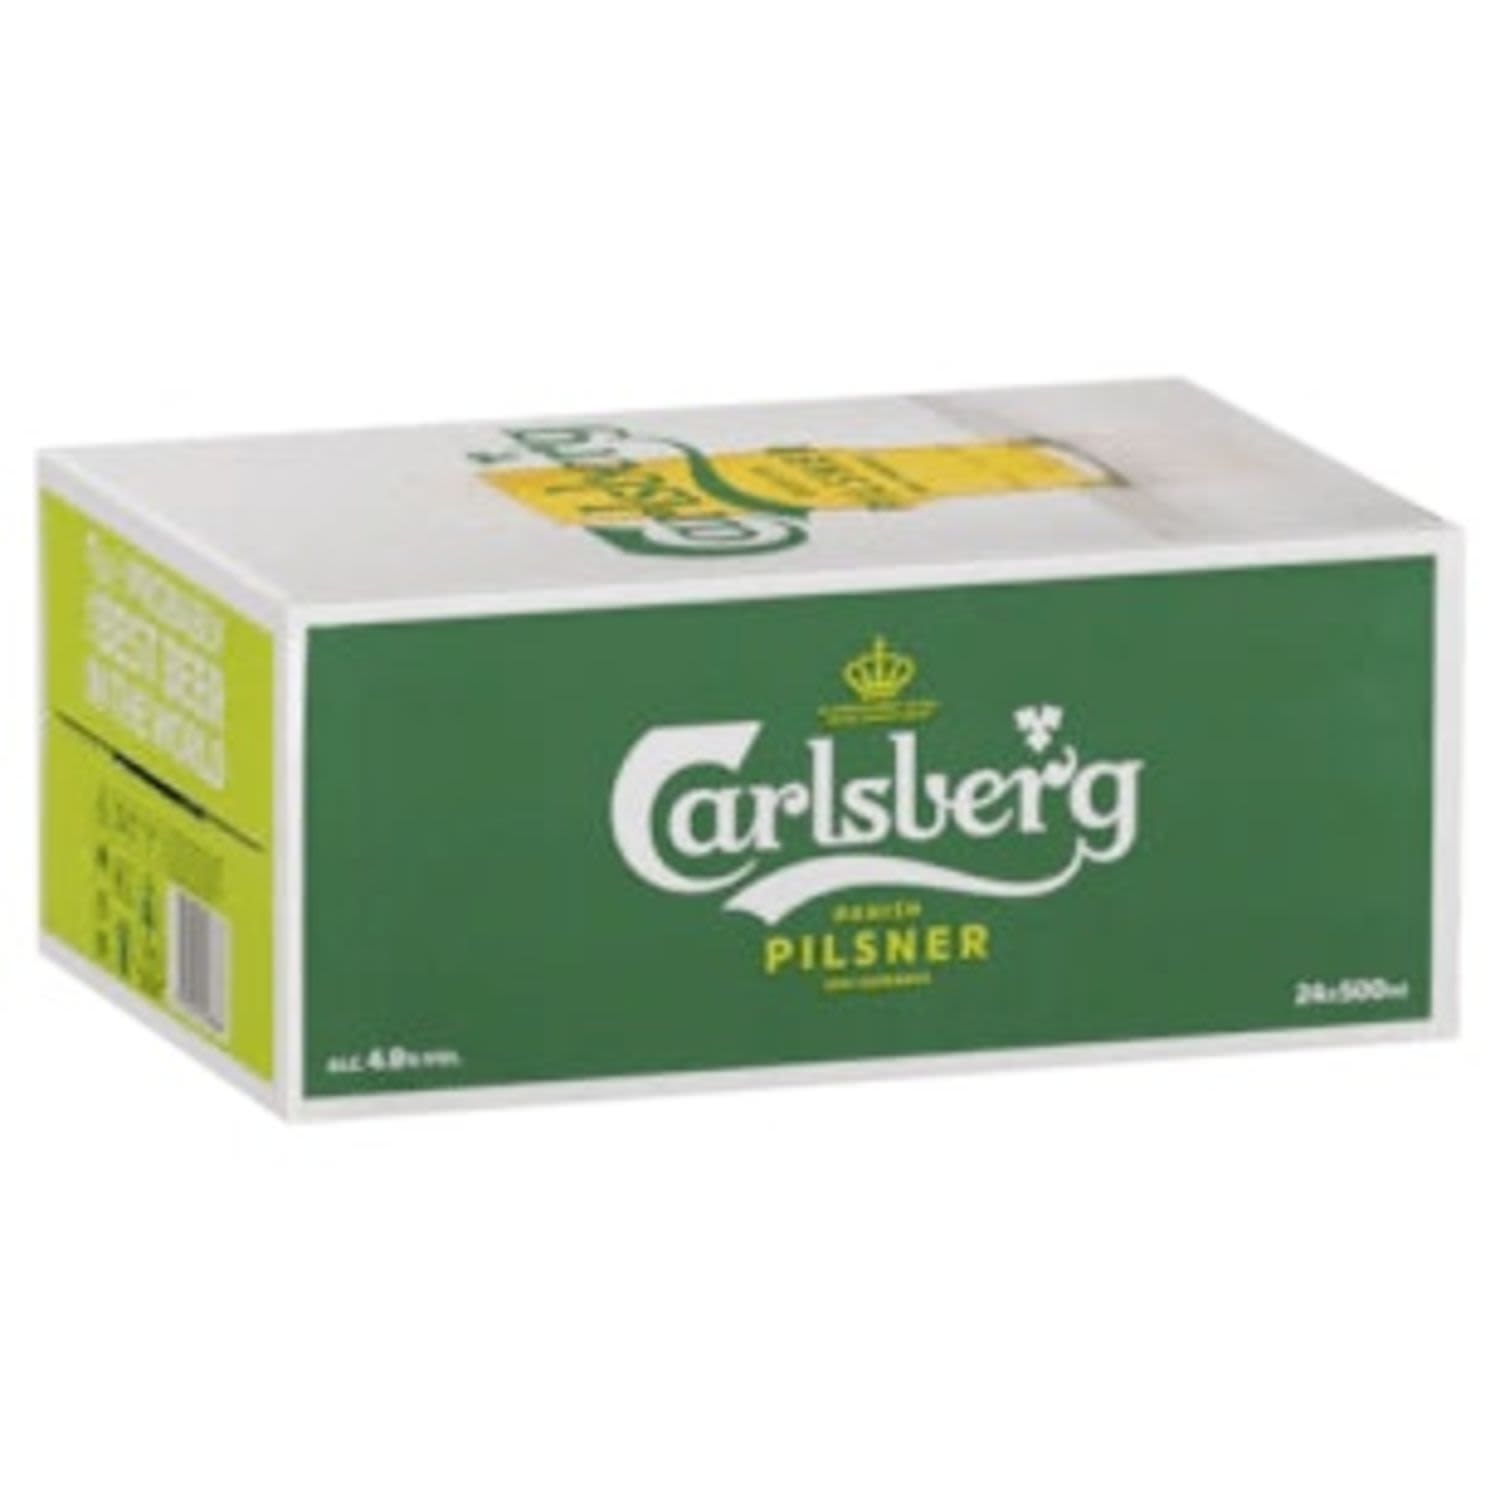 With its clean crisp taste and satisfying depth of flavour, Carlsberg pilsner epitomises refreshing. Full bodied with a prominent rich golden colour, brewed with uncompromising quality to deliver the ultimate lager experience.<br /> <br />Alcohol Volume: 4.80%<br /><br />Pack Format: 24 Pack<br /><br />Standard Drinks: 1.9</br /><br />Pack Type: Can<br /><br />Country of Origin: Denmark<br />